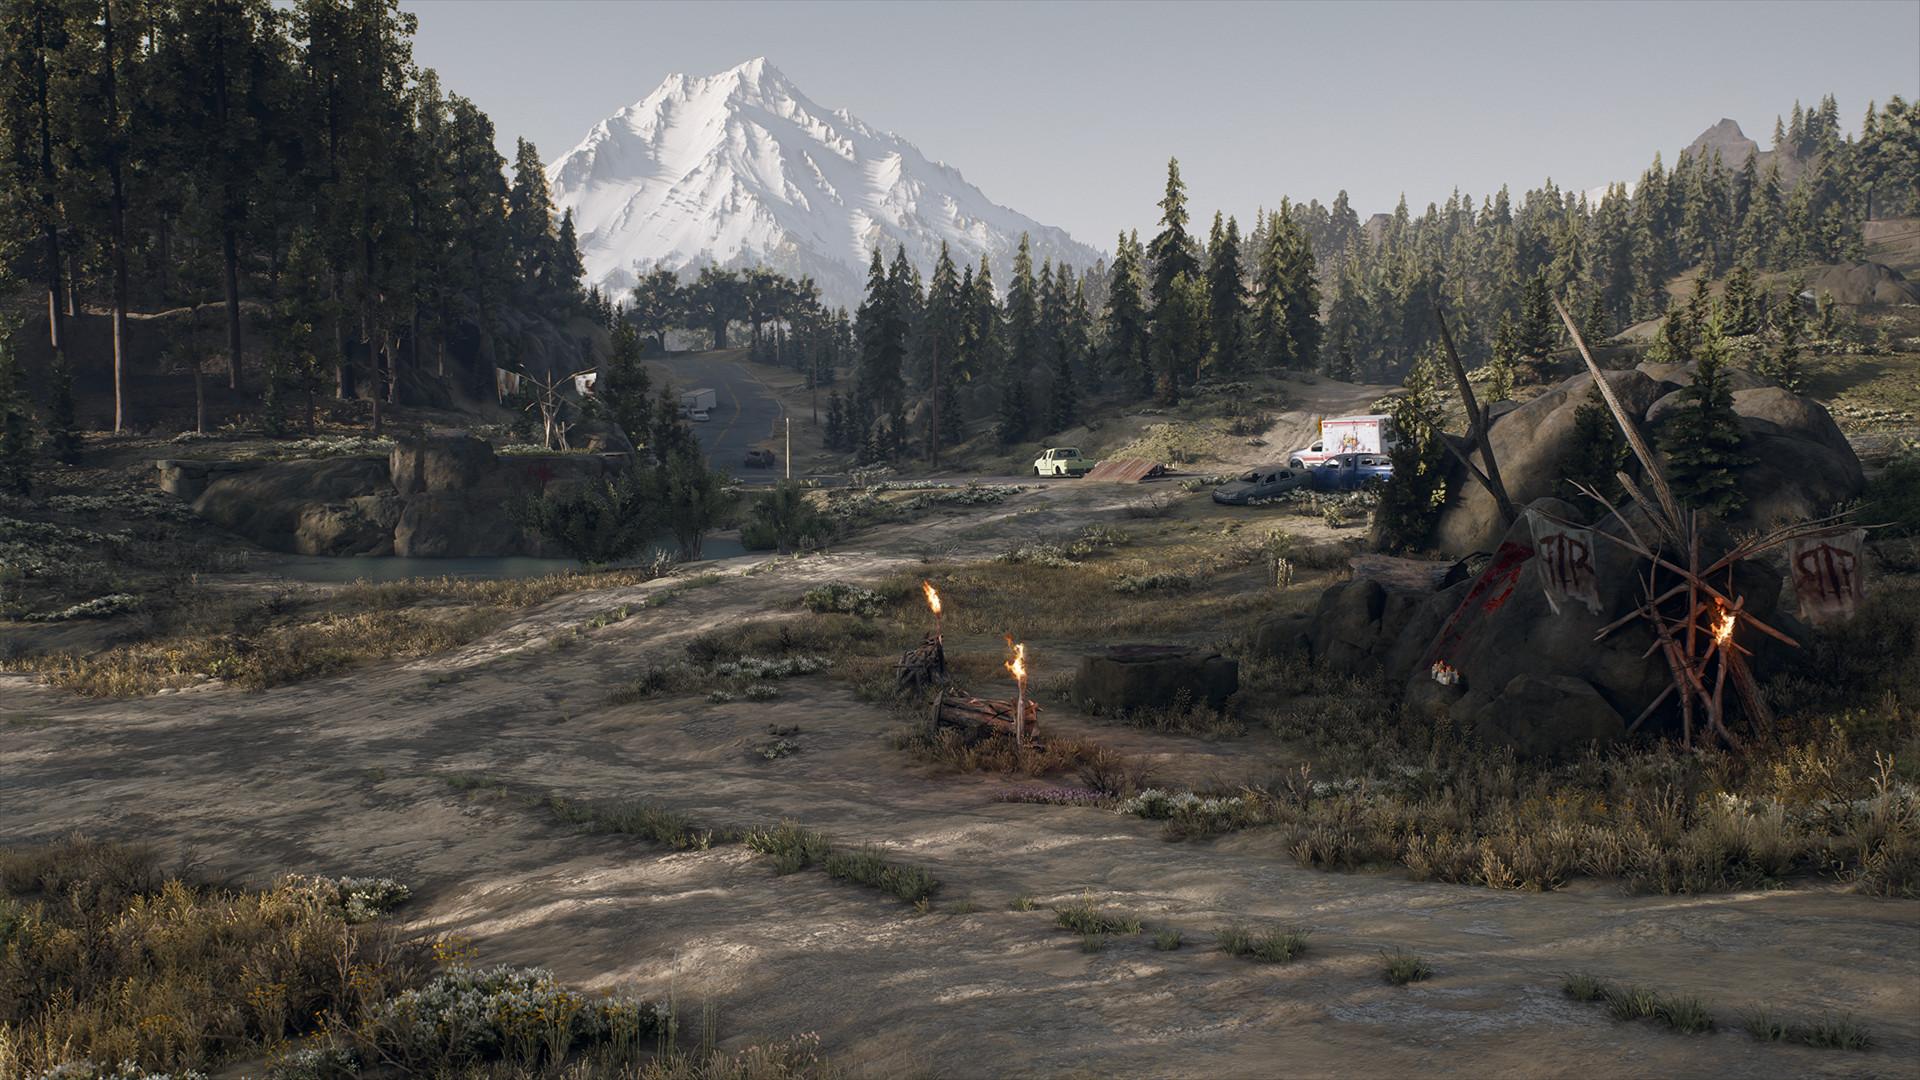 Screenshot №10 from game Days Gone